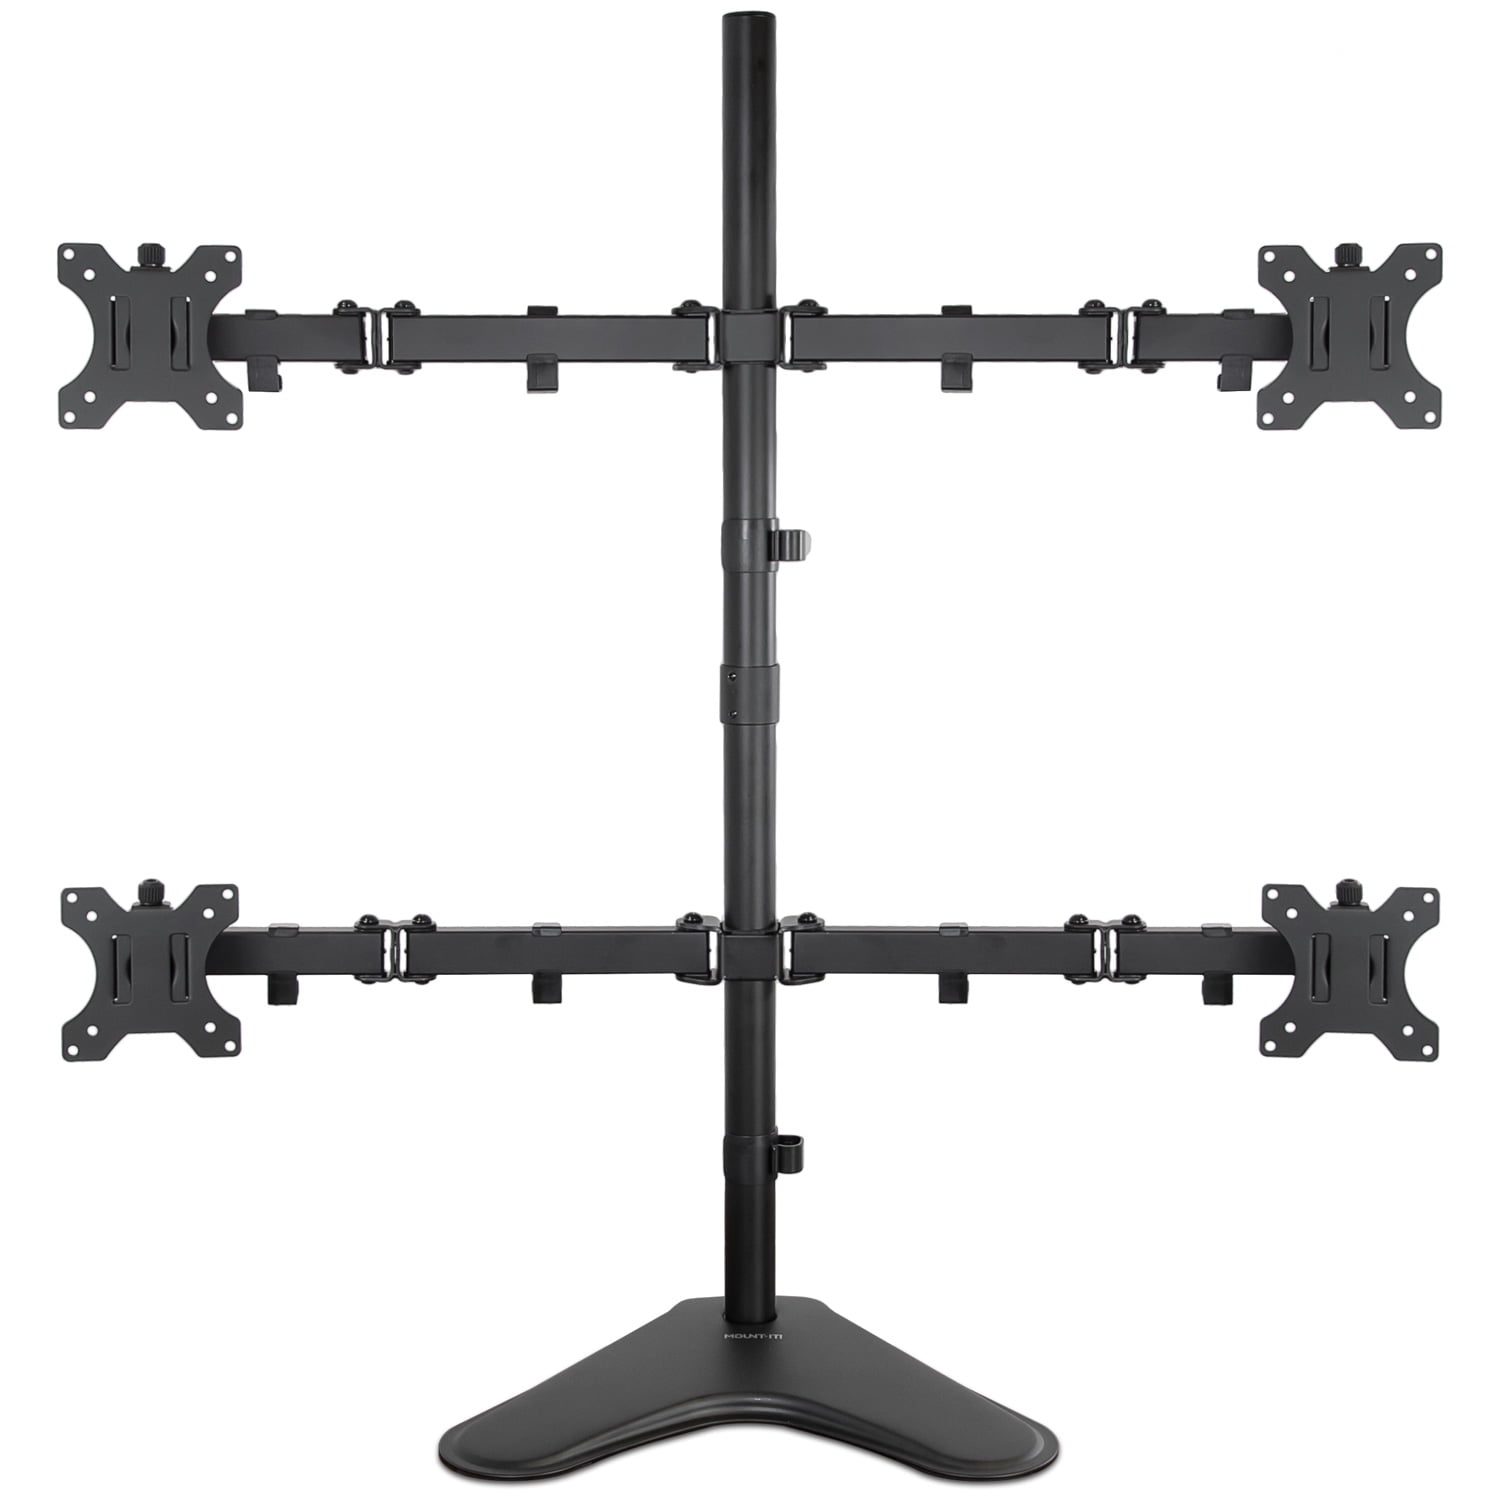 4 LCD Screens Up to 27" Heavy Duty Quad Monitor Stand Free Standing Desk Mount 